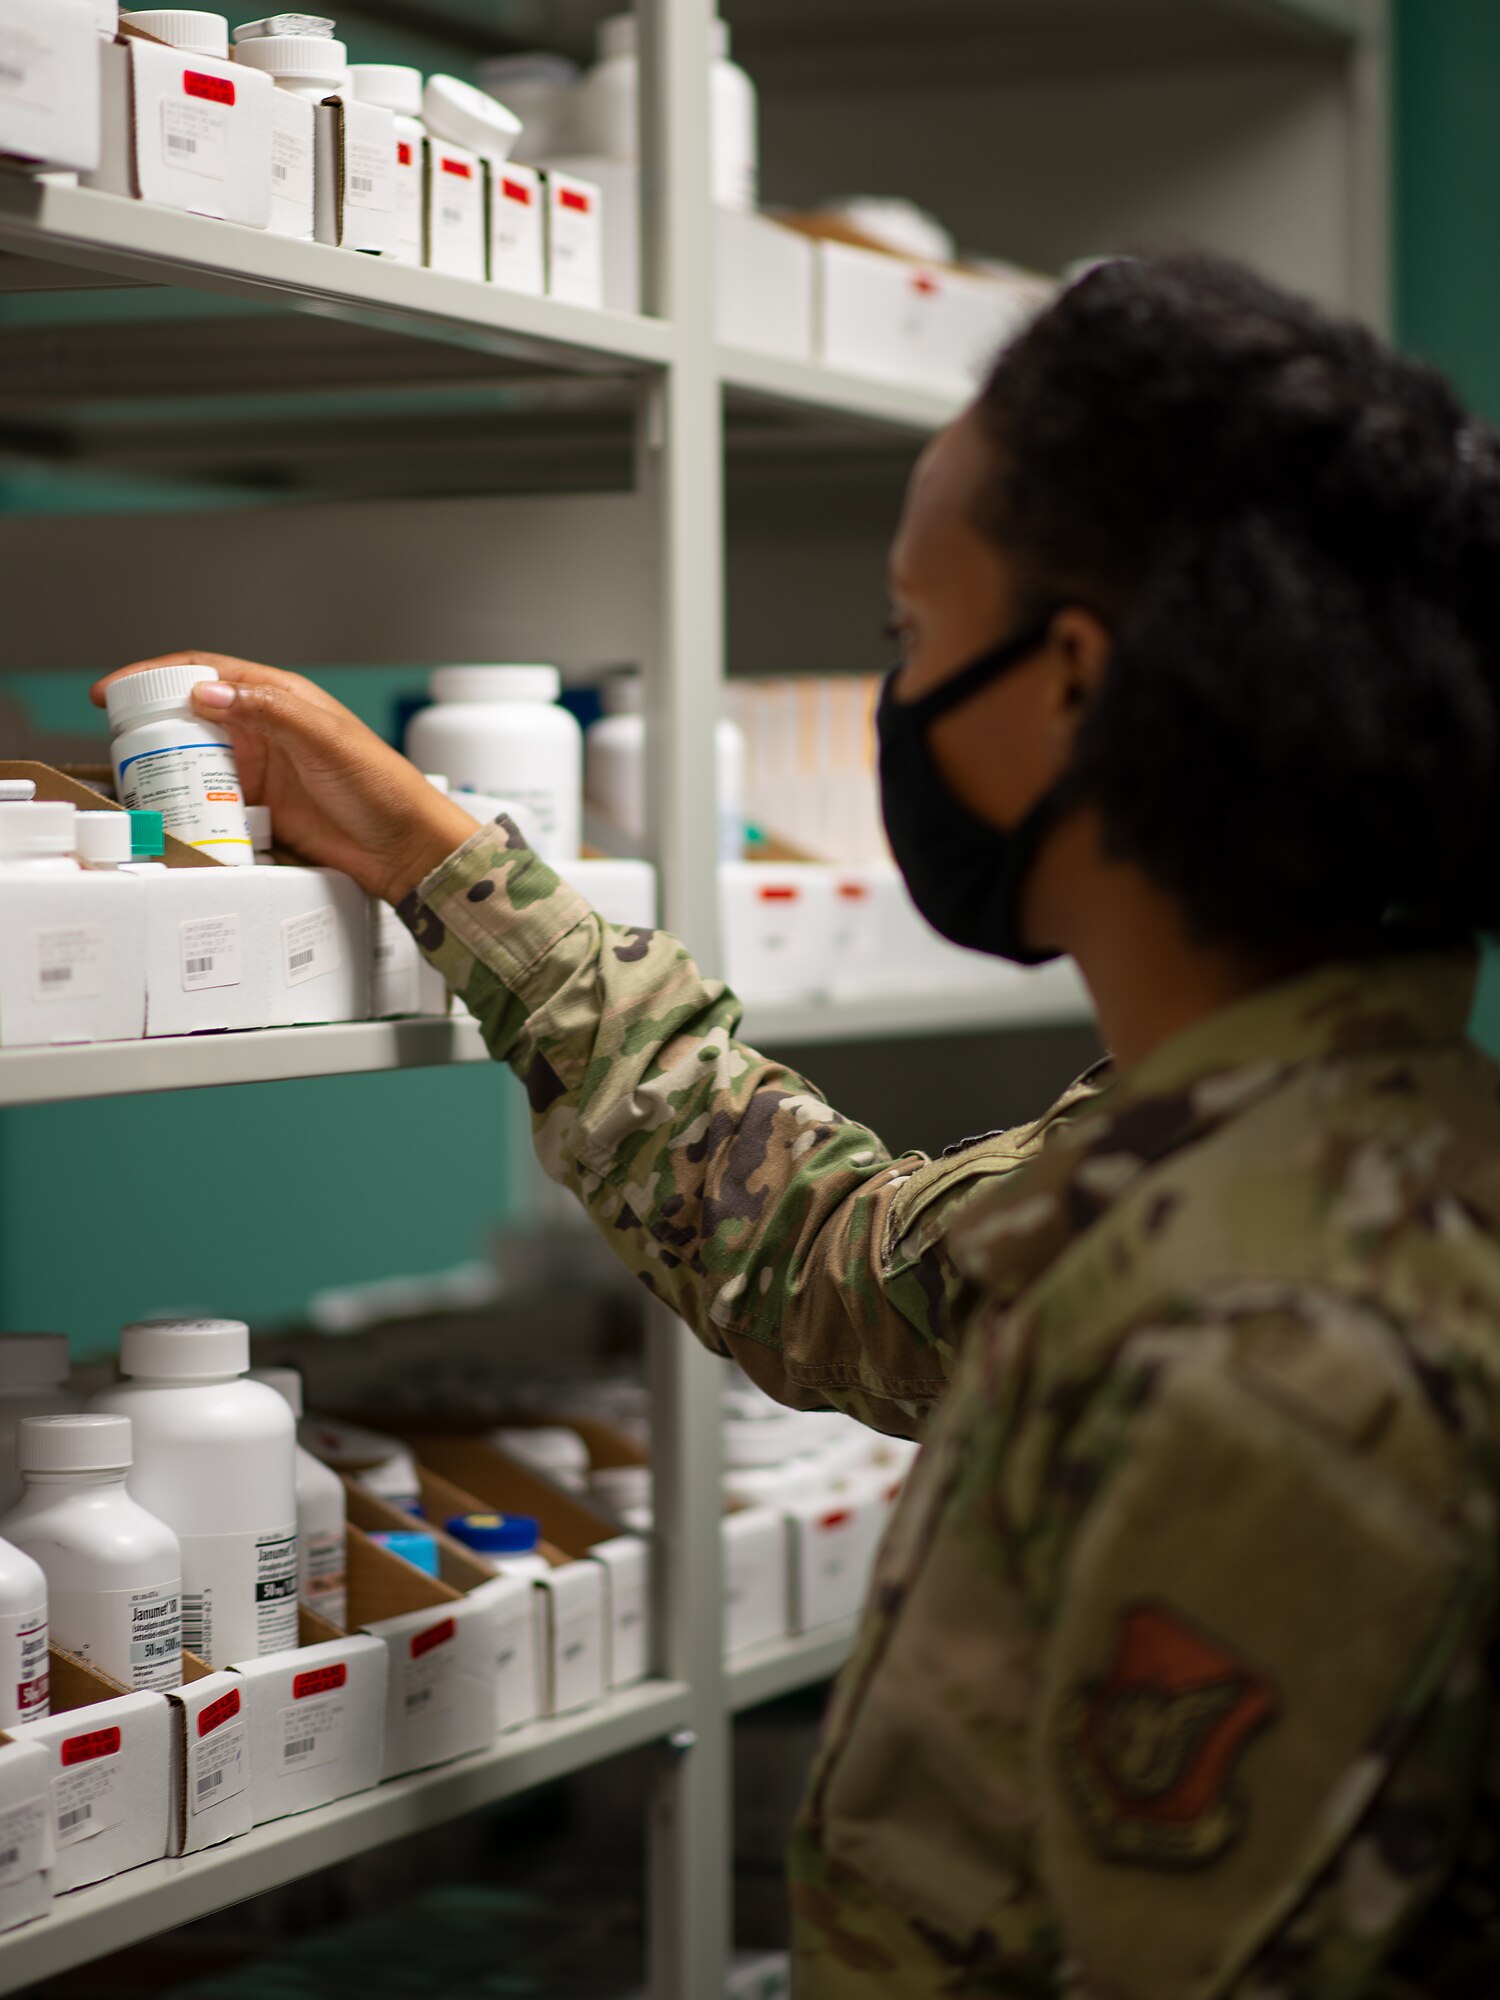 Capt. Ciera Williams, 36th Healthcare Operations Squadron chief of pharmacy operations, reads the label on a bottle of medication in the pharmacy at Andersen Air Force Base, Guam, Jan. 28, 2021. During the last week of January, members of Andersen AFB recognized all the hard work done by Airmen in the Biomedical Science Corps in honor of the 56th Annual Biomedical Science Corps Appreciation Week. (U.S. Air Force photo by Airman Kaitlyn Preston)